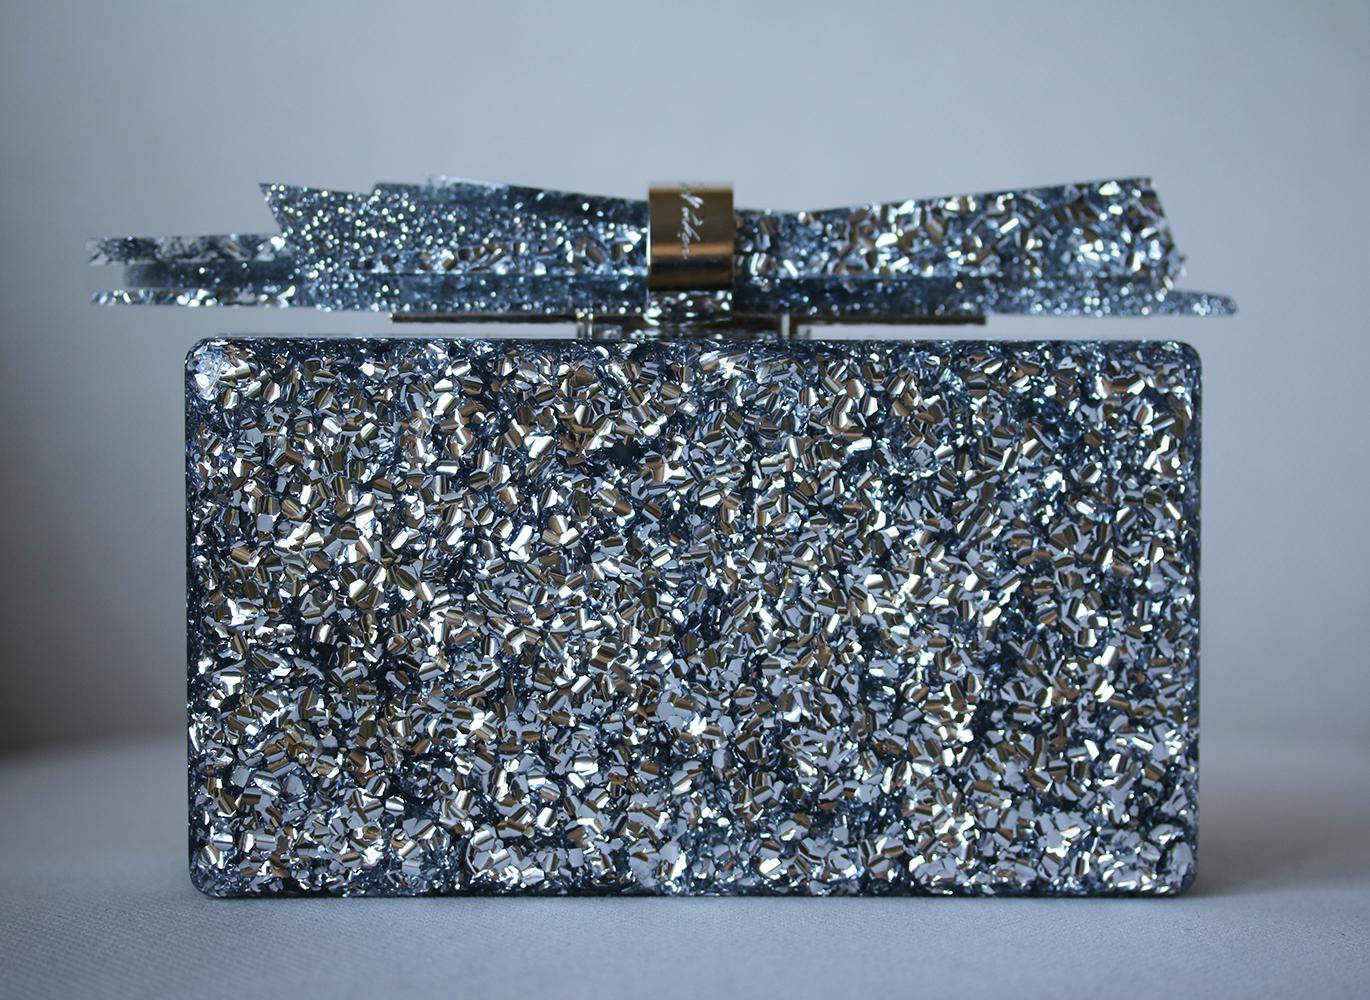 Edie Parker's 'Wolf' clutch is a glamorous accent to evening outfits, as proven by founder Brett Heyman at Harper's BAZAAR's 150th anniversary party. It's hand-poured from silver glittered acrylic and topped with a statement clasp that resembles